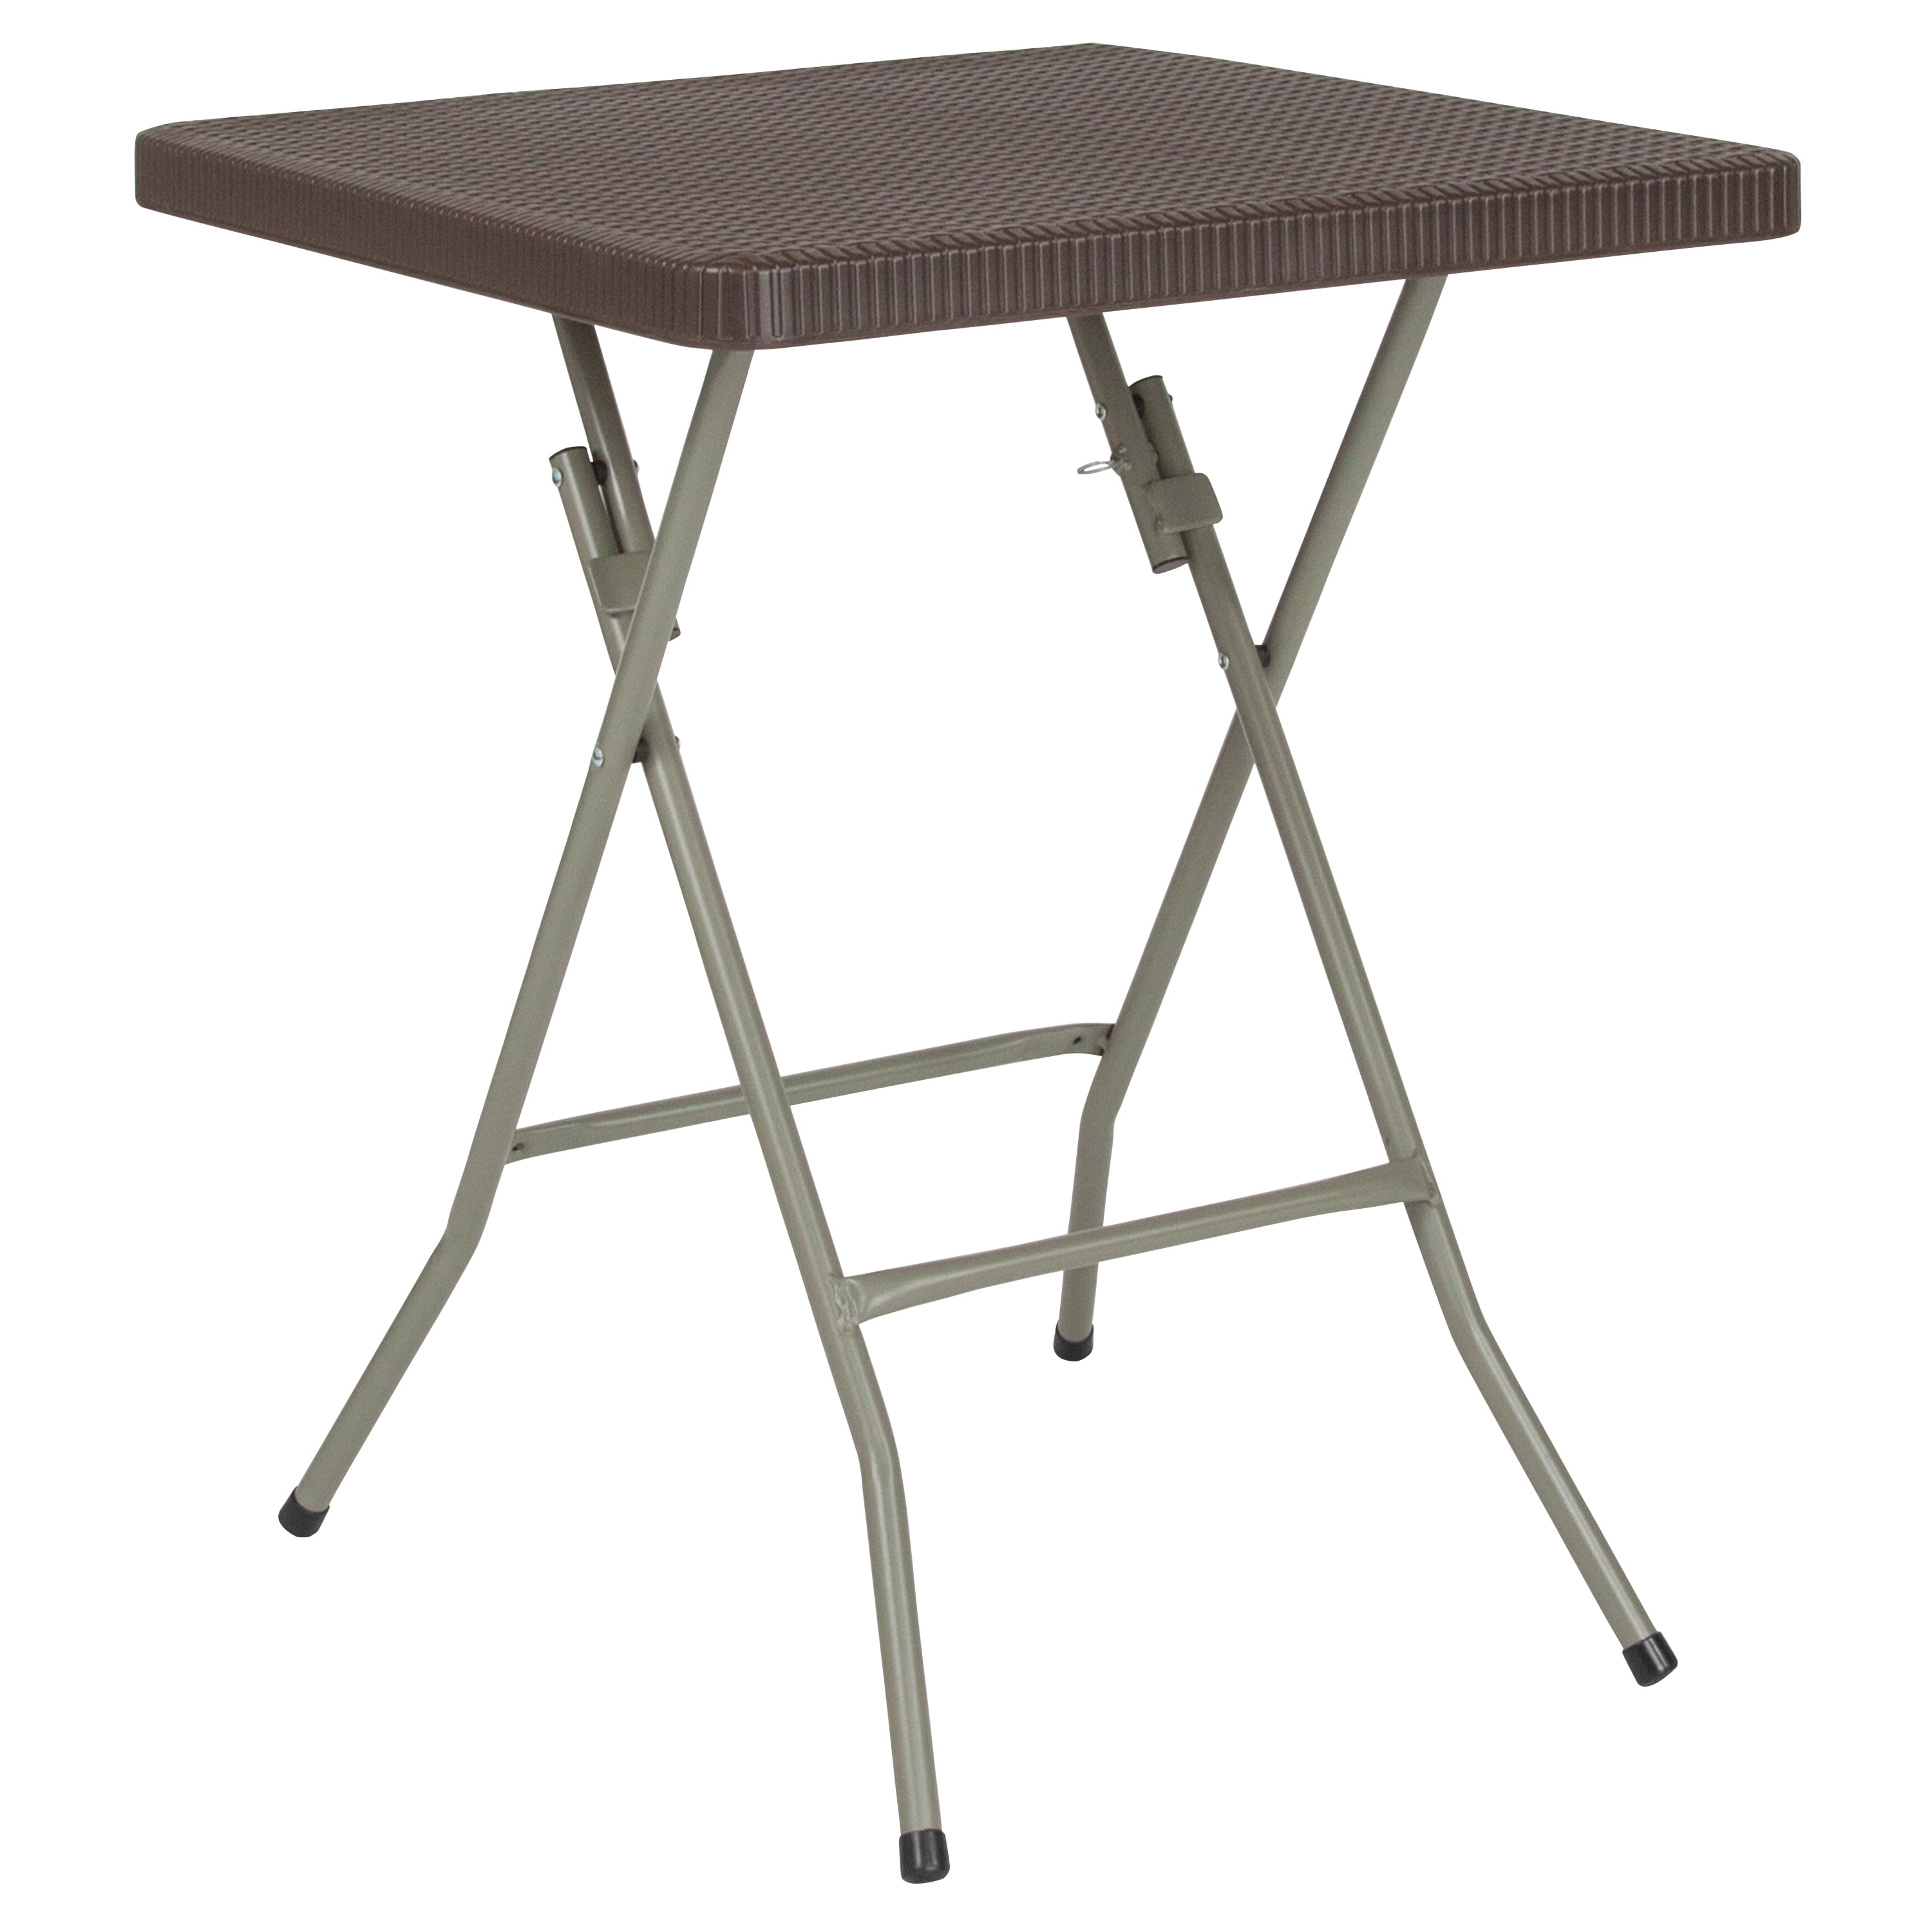 555890901 for sale online Mainstays 31 Inches Round Folding Table 